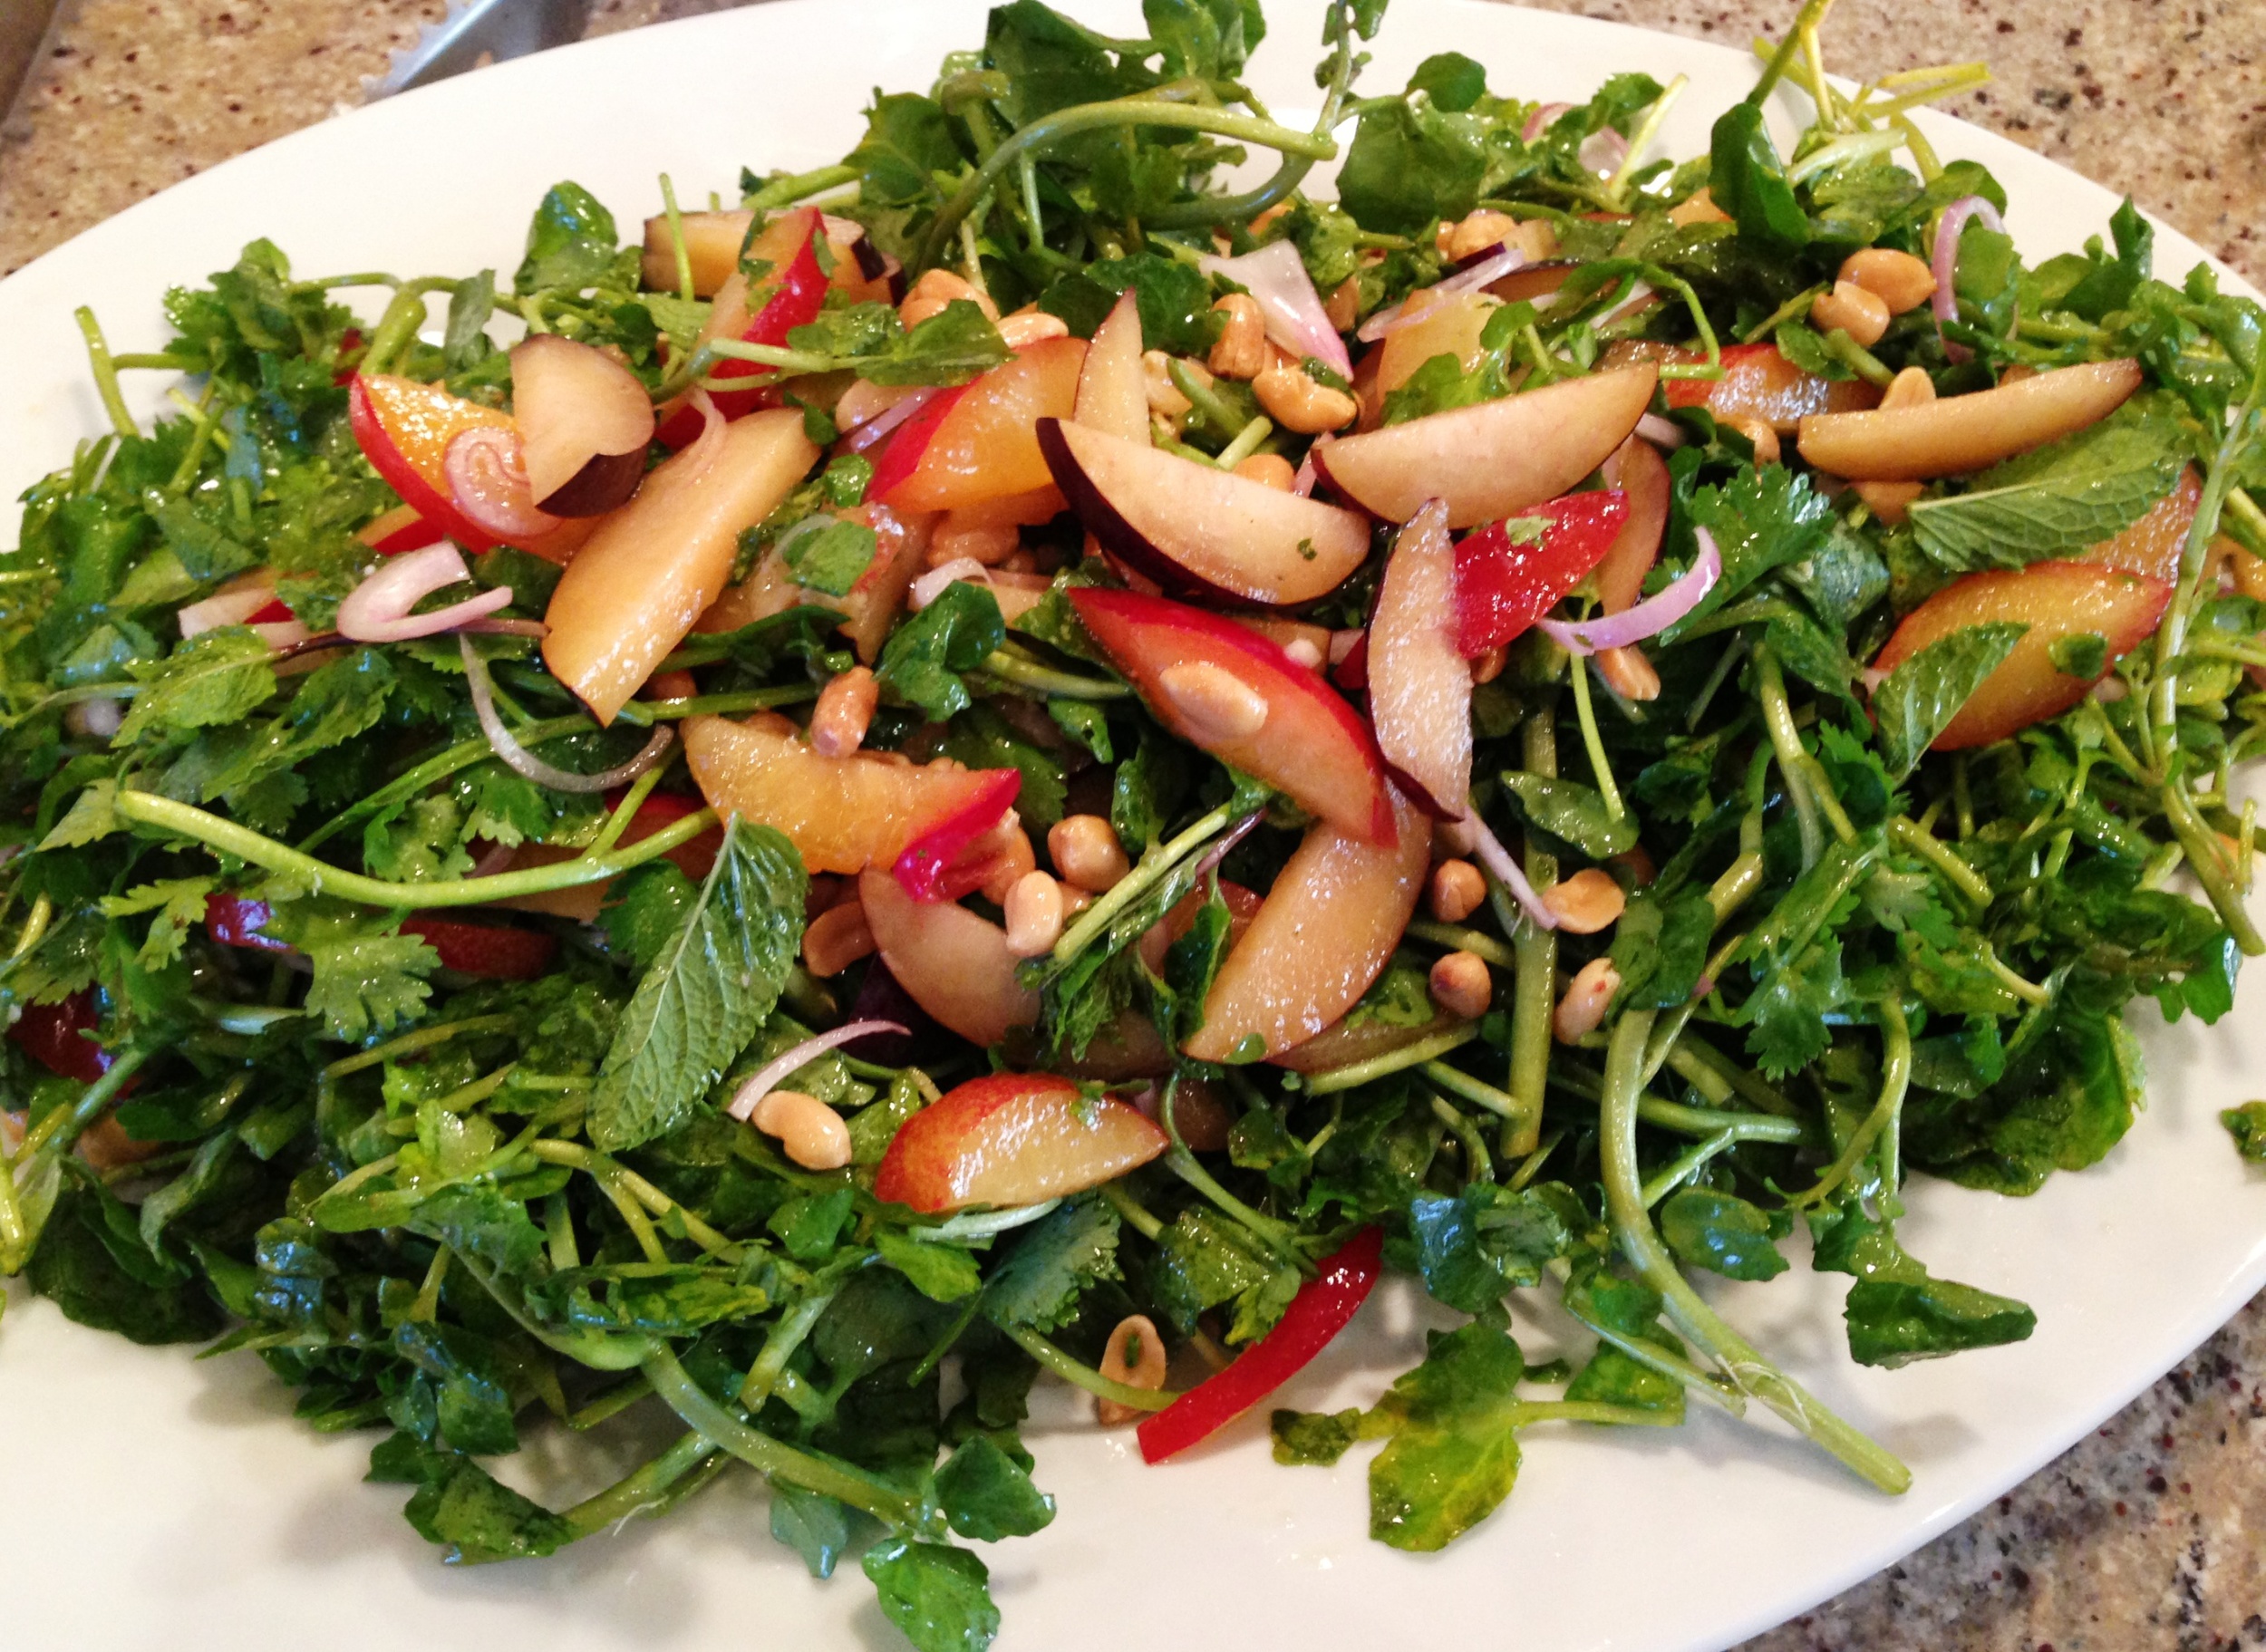 Watercress and herb salad with stone fruit, red onion, peanuts, and Vietnamese nuoc mam vinaigrette